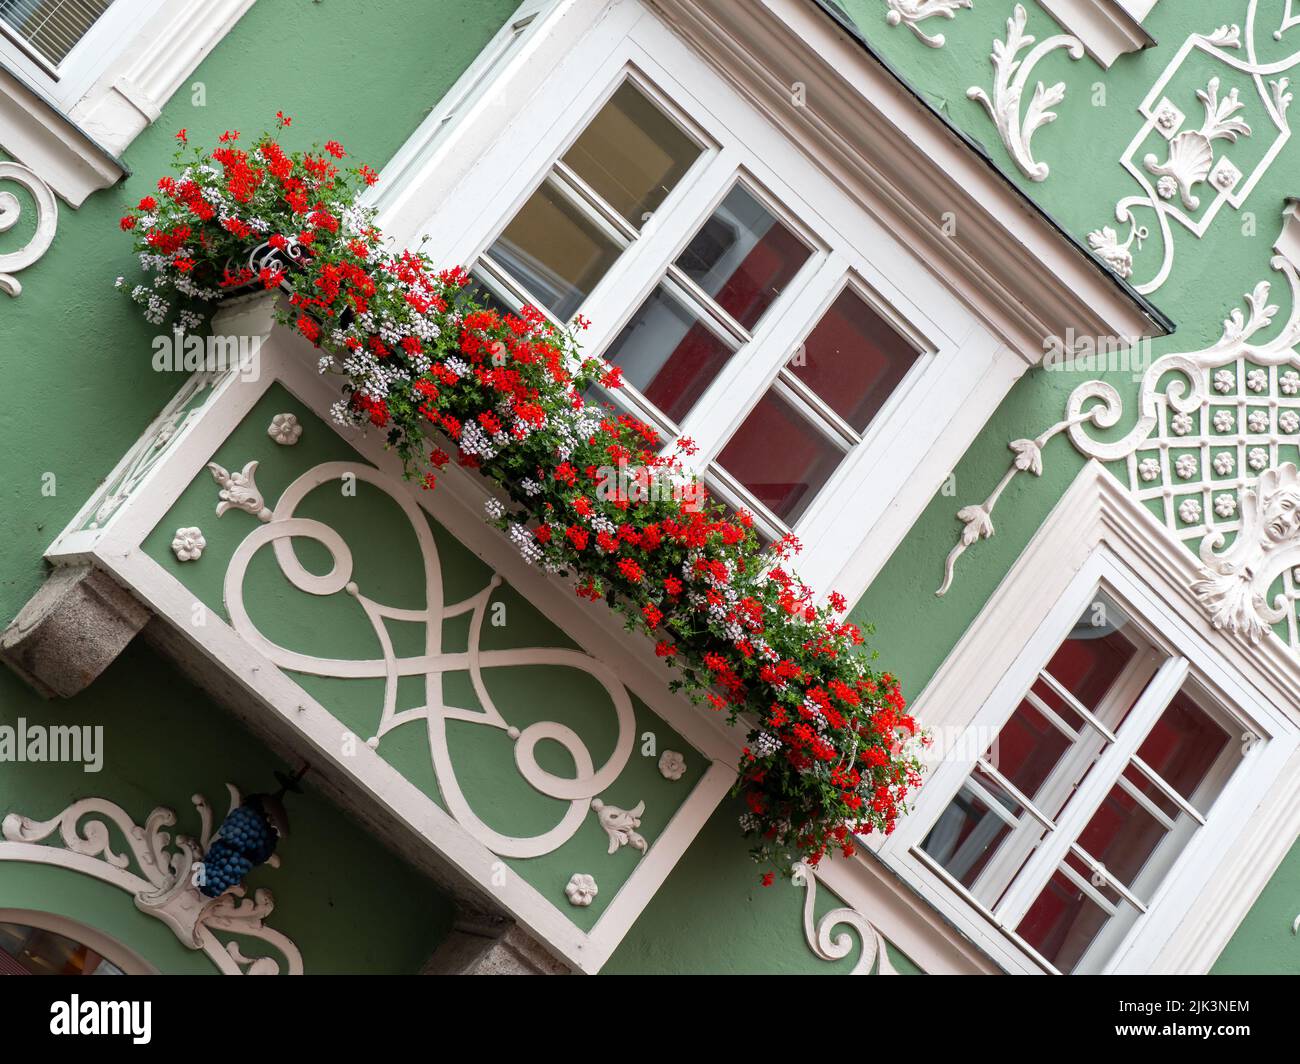 SCHARDING, AUSTRIA - JULY 12, 2019:  Pretty geranium flowers on balcony of Baroque style town house in the Old Town Stock Photo